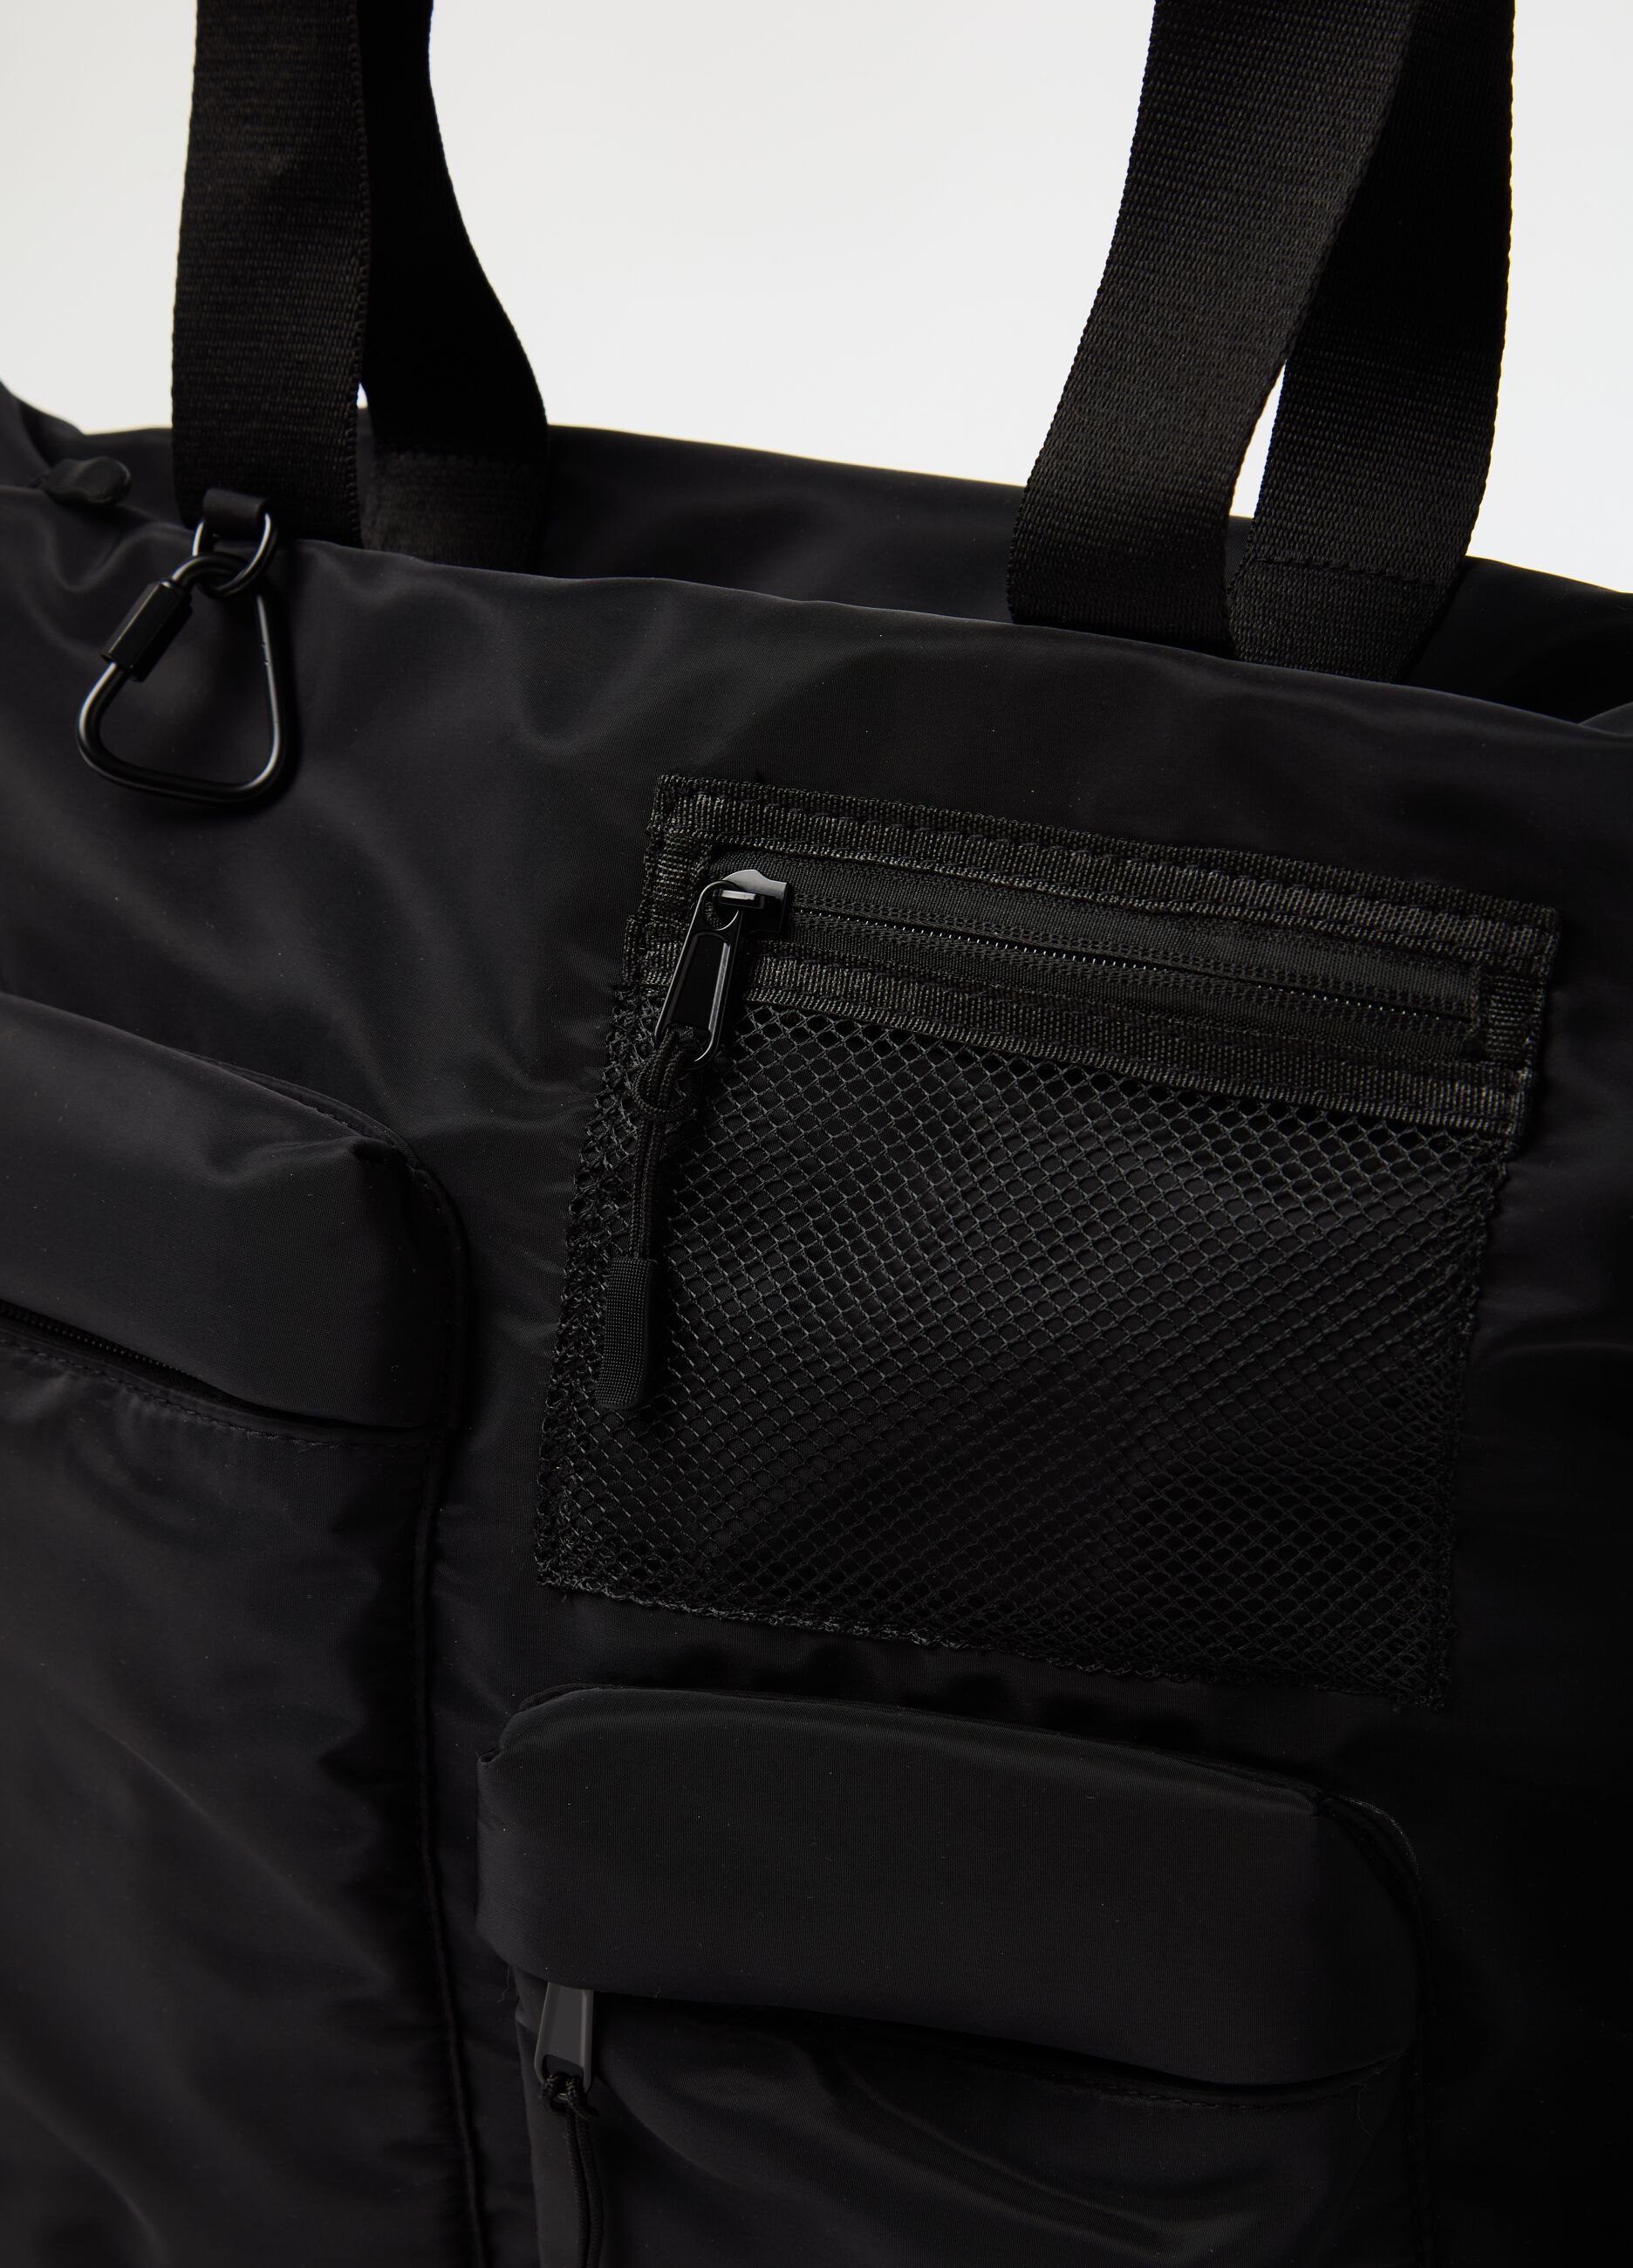 Shopping bag with external pockets